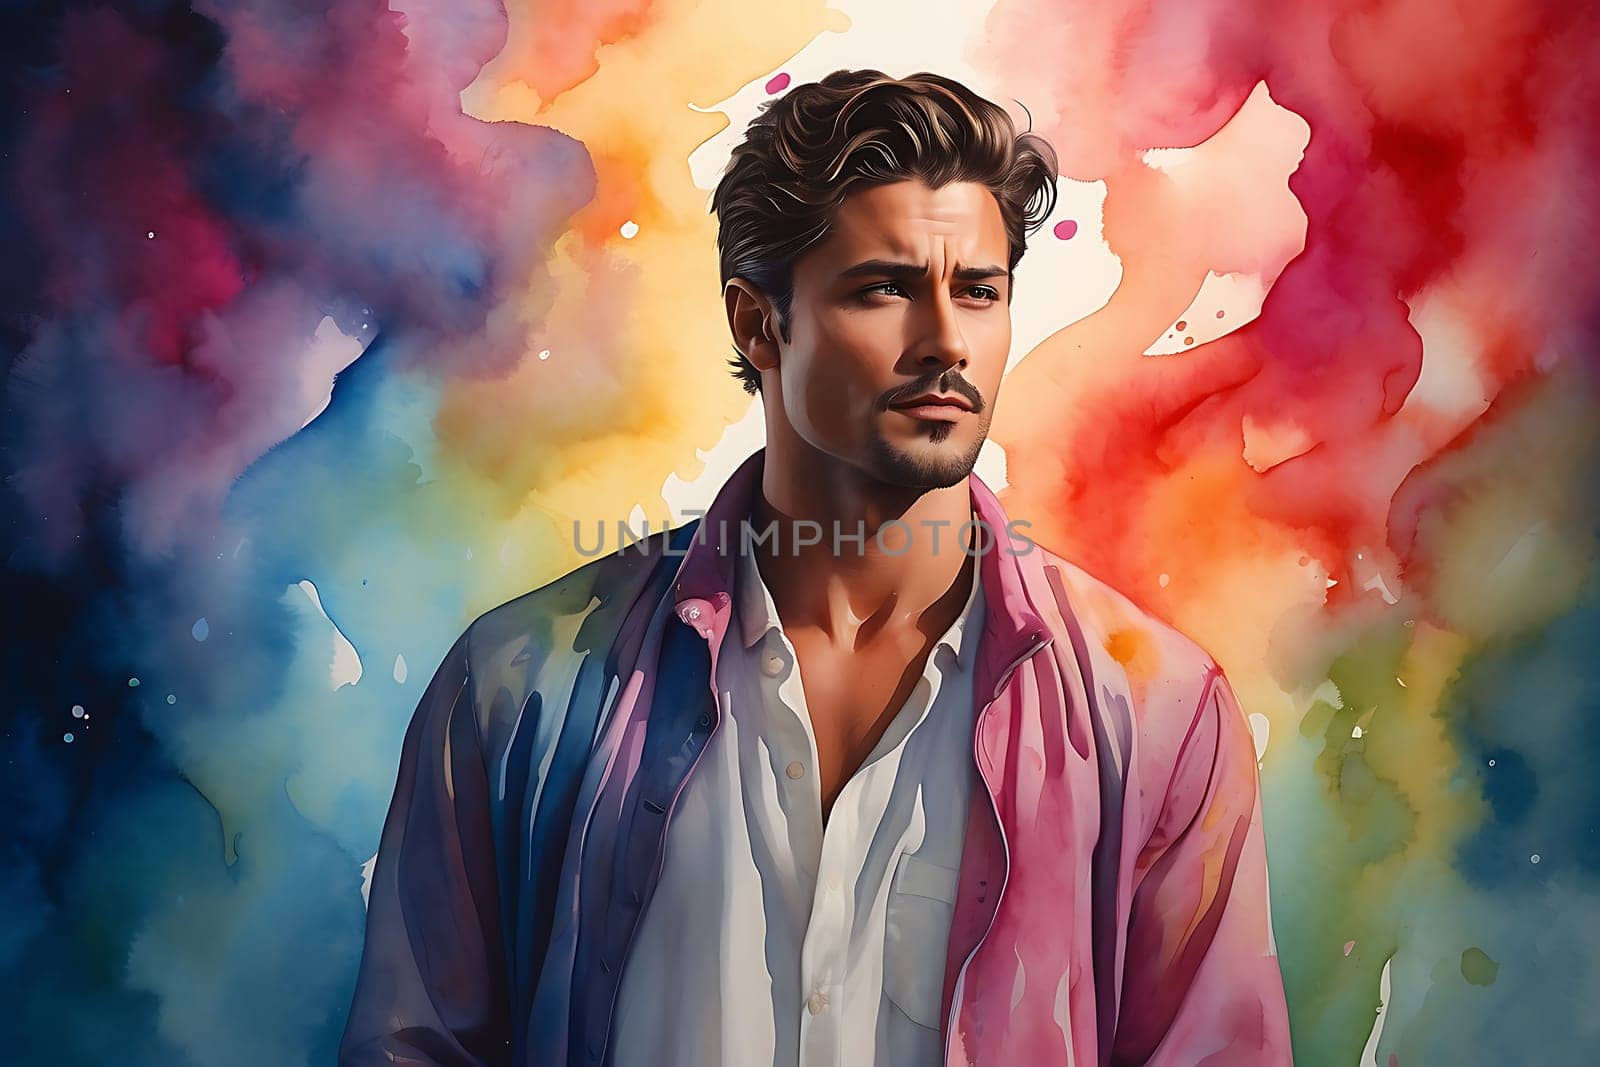 A vibrant painting featuring a man standing against a visually striking, vividly colored backdrop.